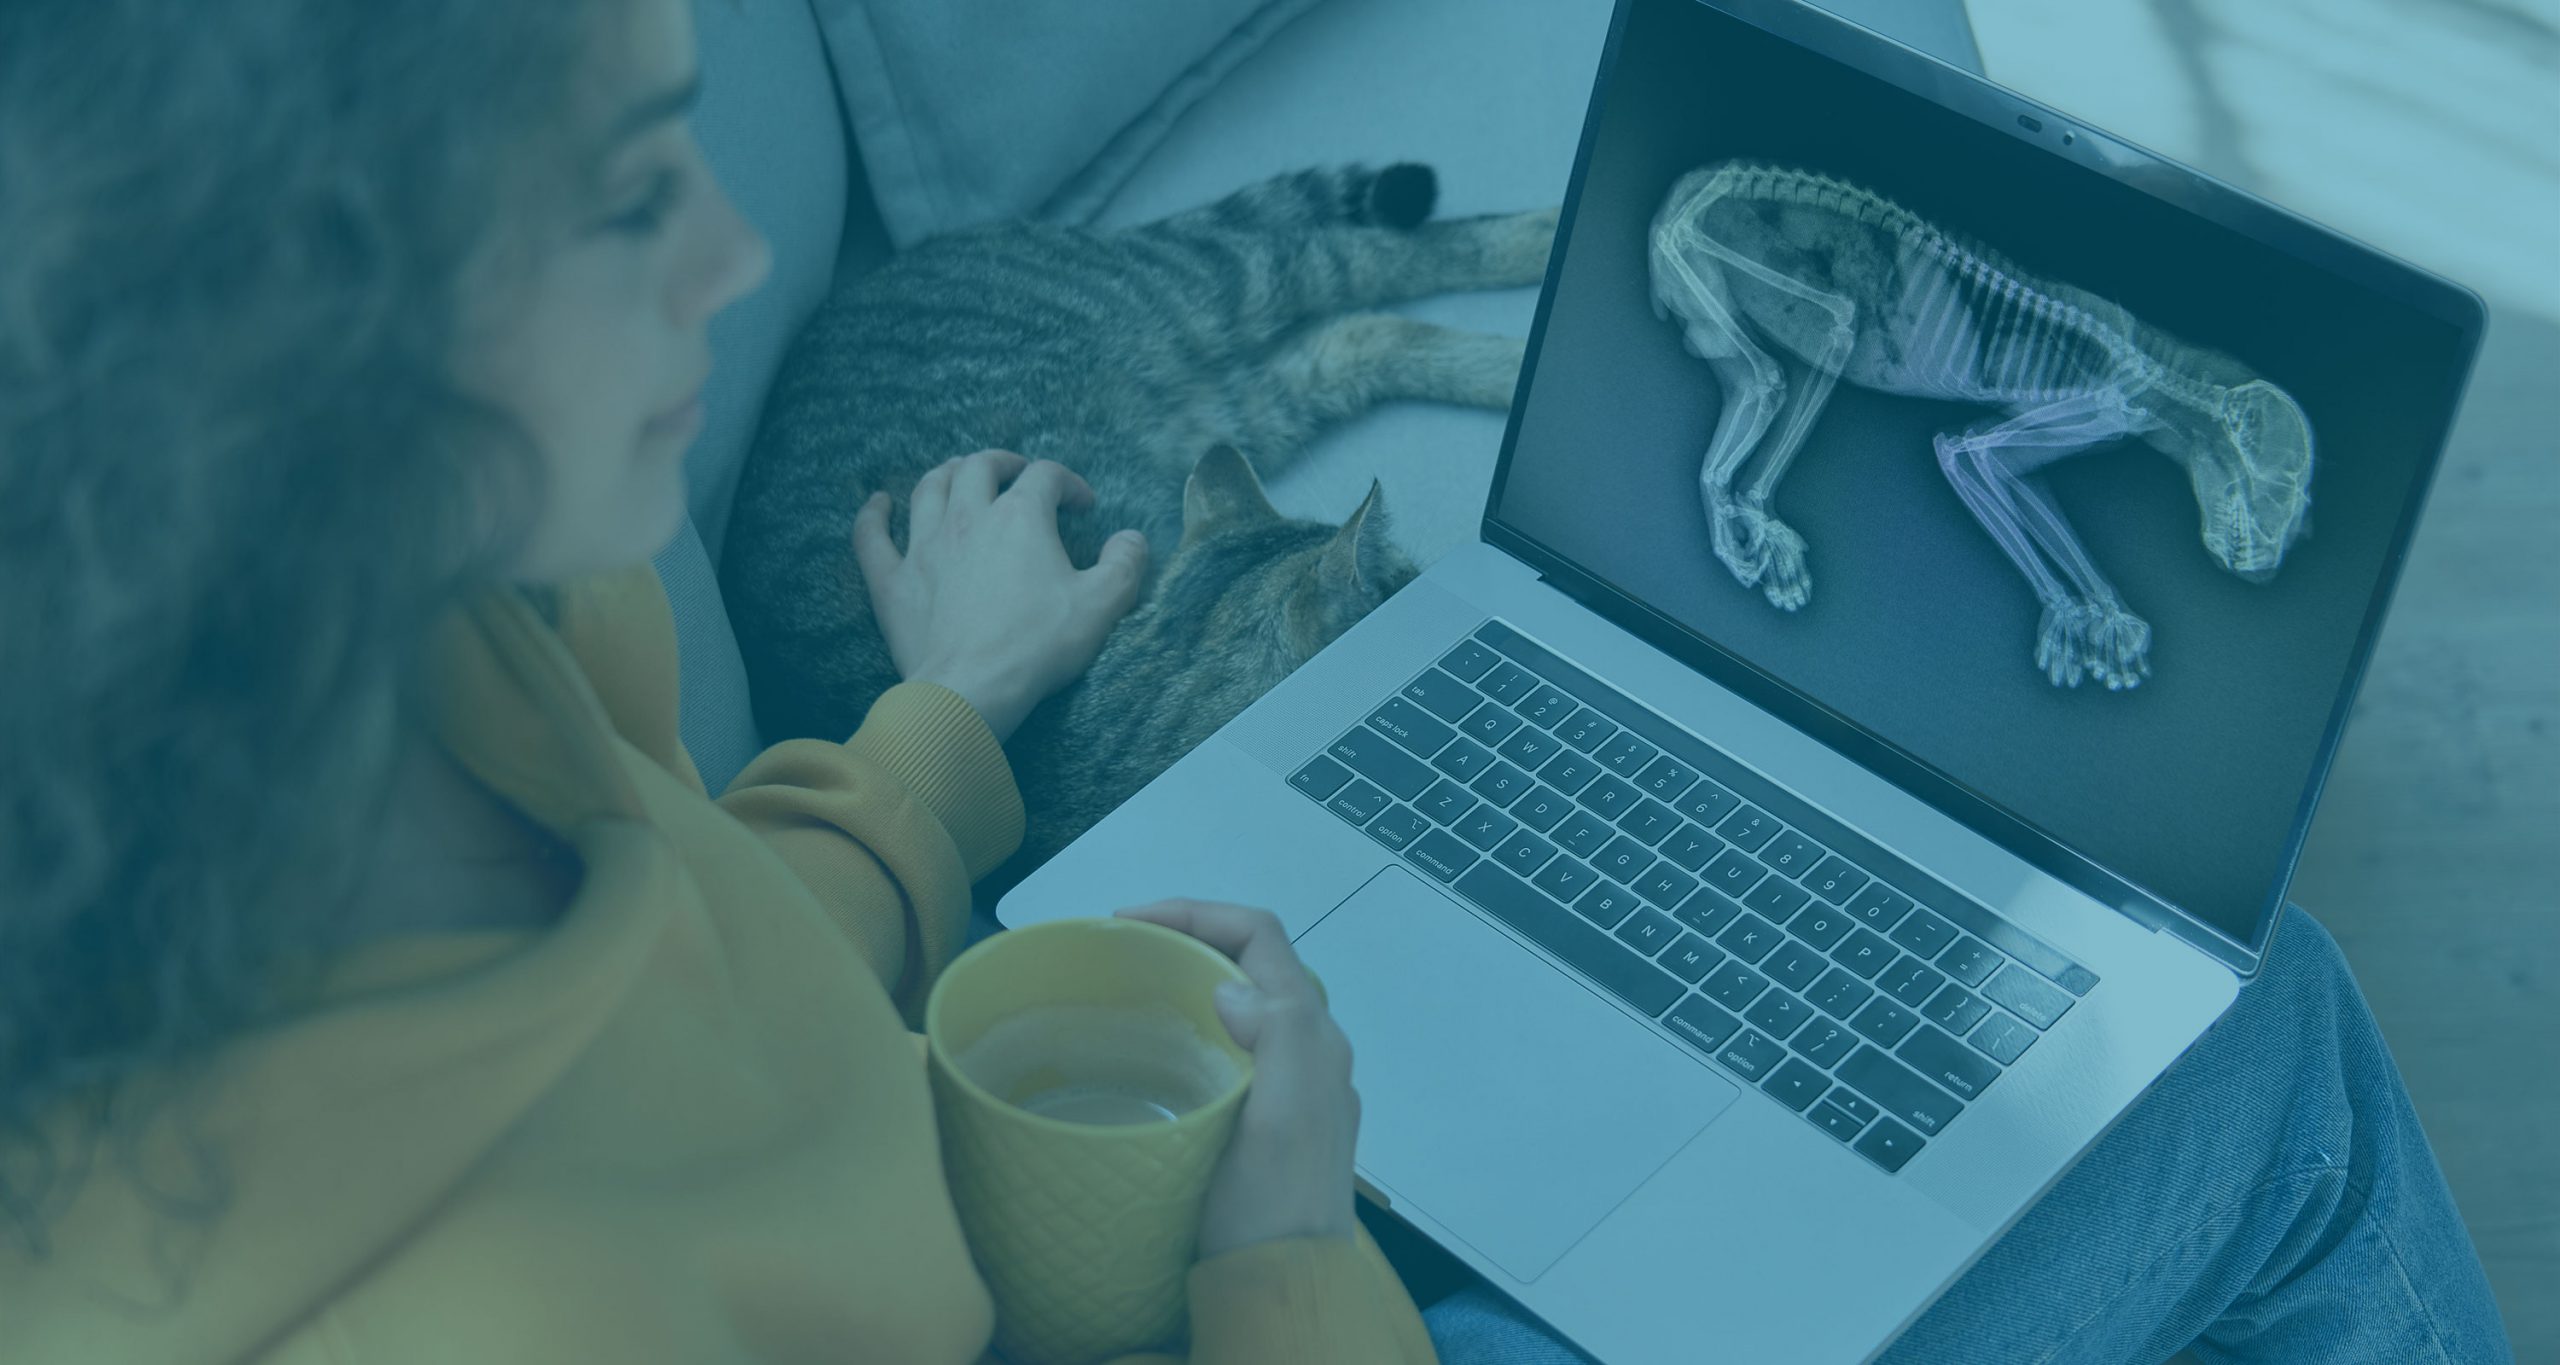 Learn basic veterinary radiology skills<br/>in the comfort of your own home